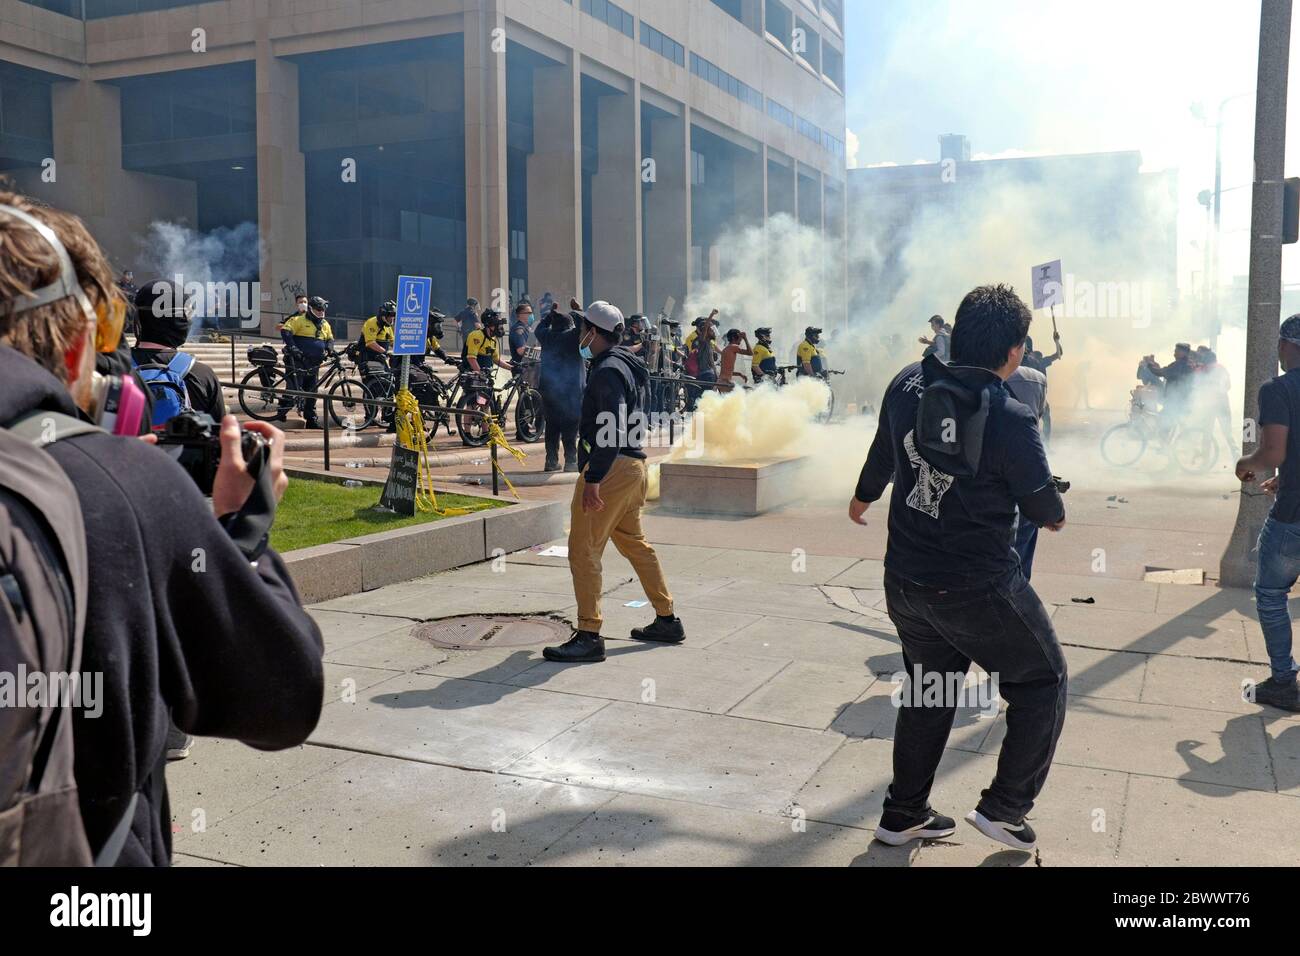 Tear gas is used by Cleveland Police to disperse protesters outside the Justice Center in downtown Cleveland, Ohio, USA.  Activists protesting police brutality in America and racial relations between the police and the communities they serve results in chaos outside the Justice Center, headquarters of the Cleveland Police, which spread throughout downtown Cleveland on May 30, 2020. Stock Photo